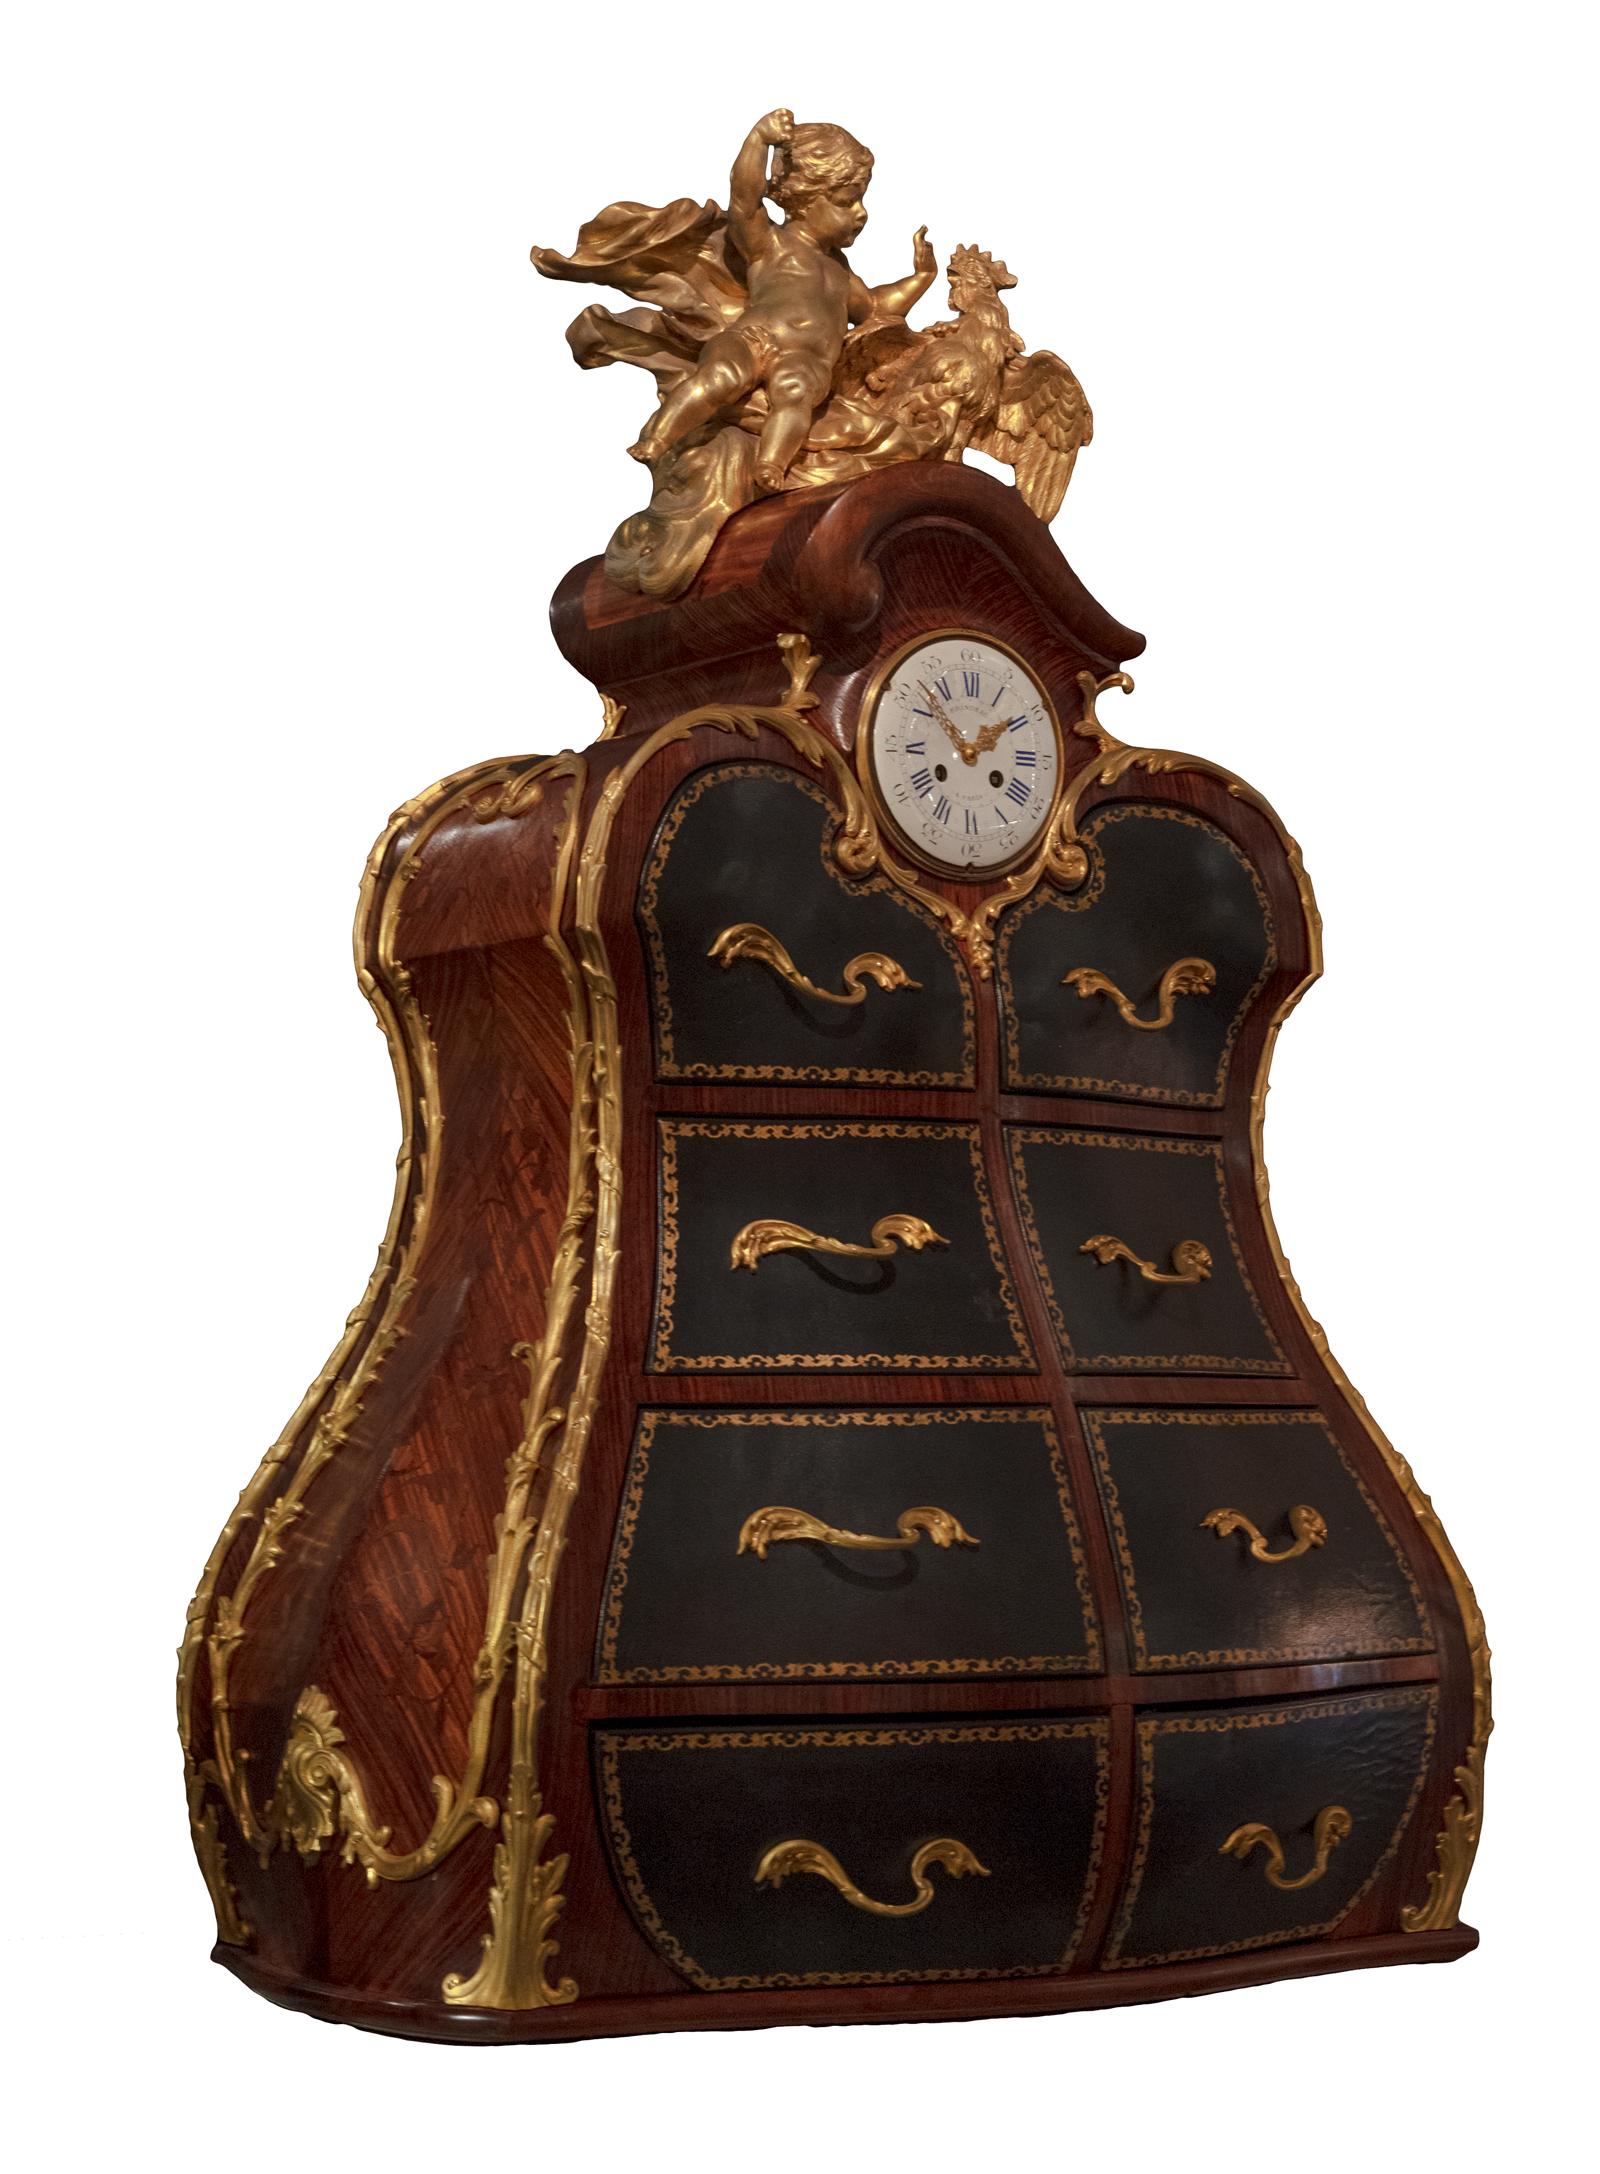 A highly unusual Louis XV gilt-bronze mounted marquetry cartonnier. France, 18th century. This bombé shaped cartonnier (an ornamental box for papers usually for placing on a desk), surmounted by a gilt-bronze putto and a cockerel. The top section is